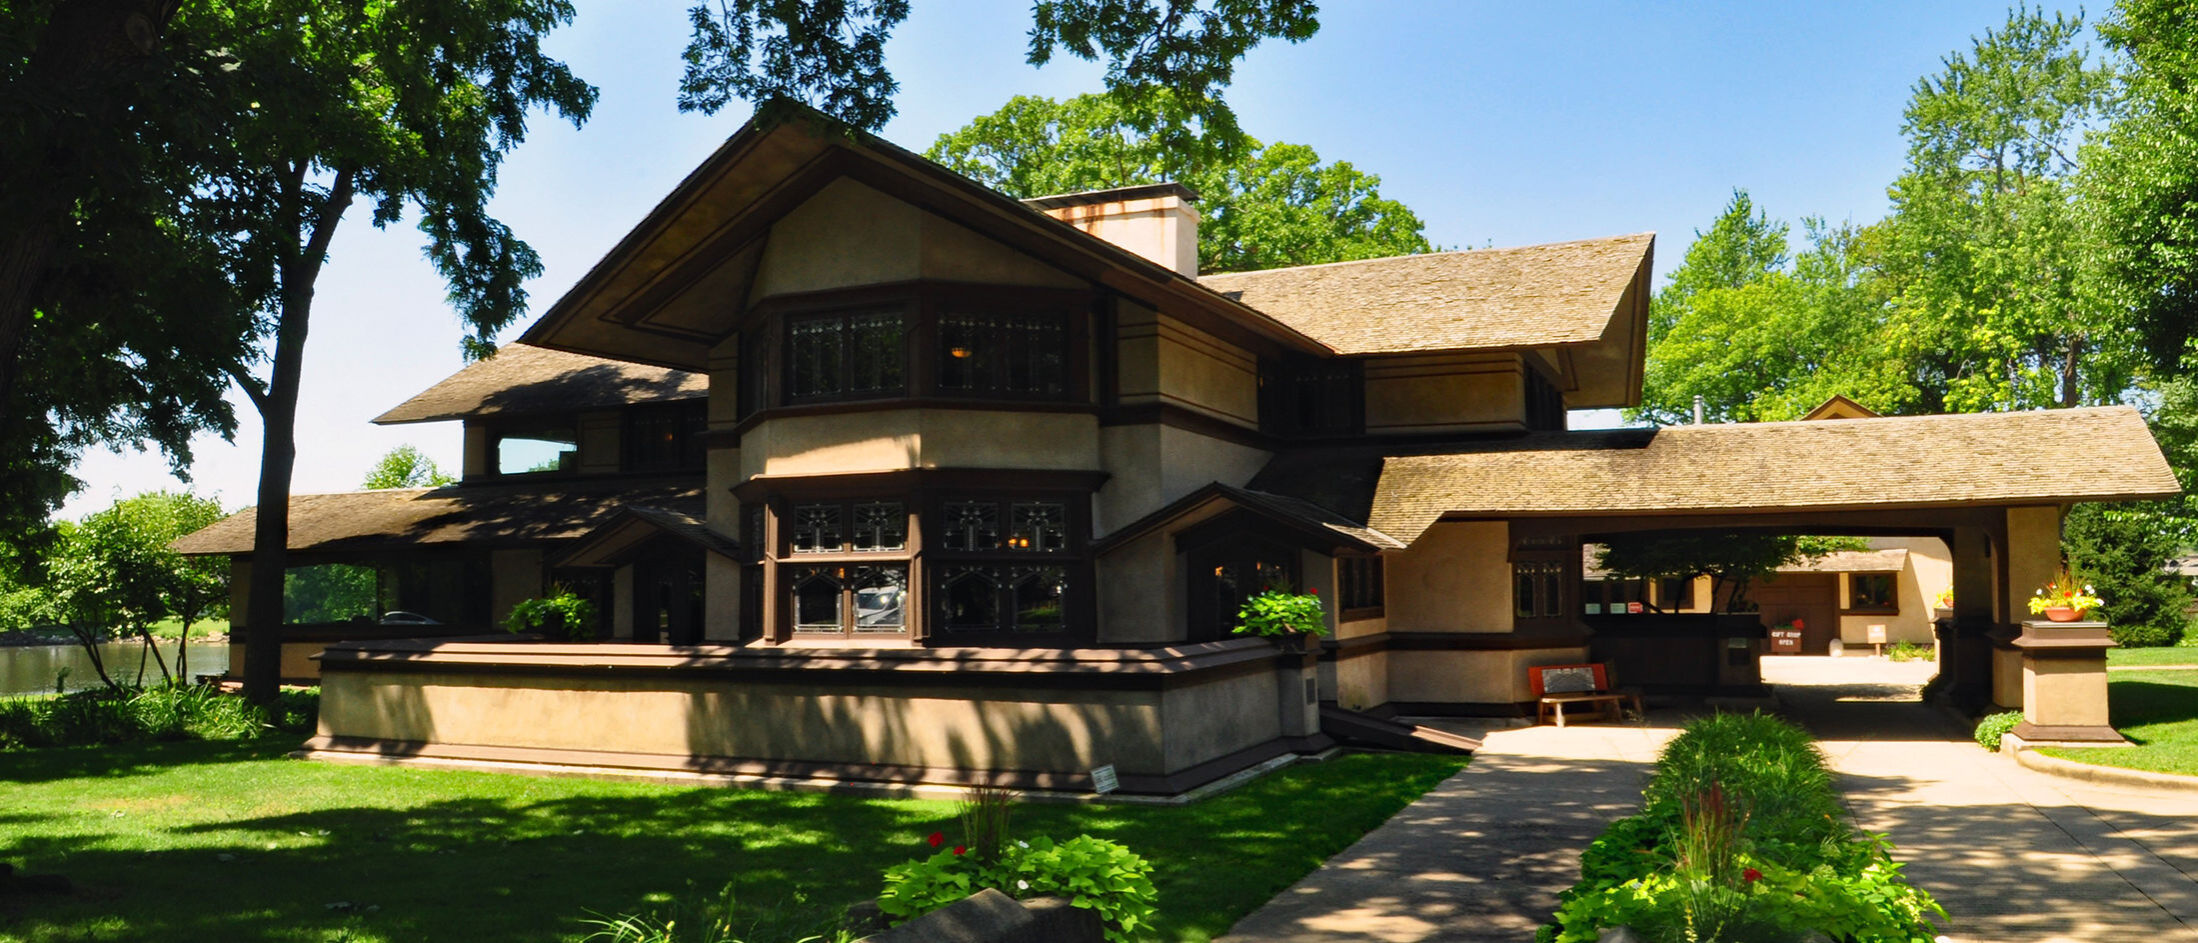 Prairie style bookends: Frank Lloyd Wright works in Kansas and 